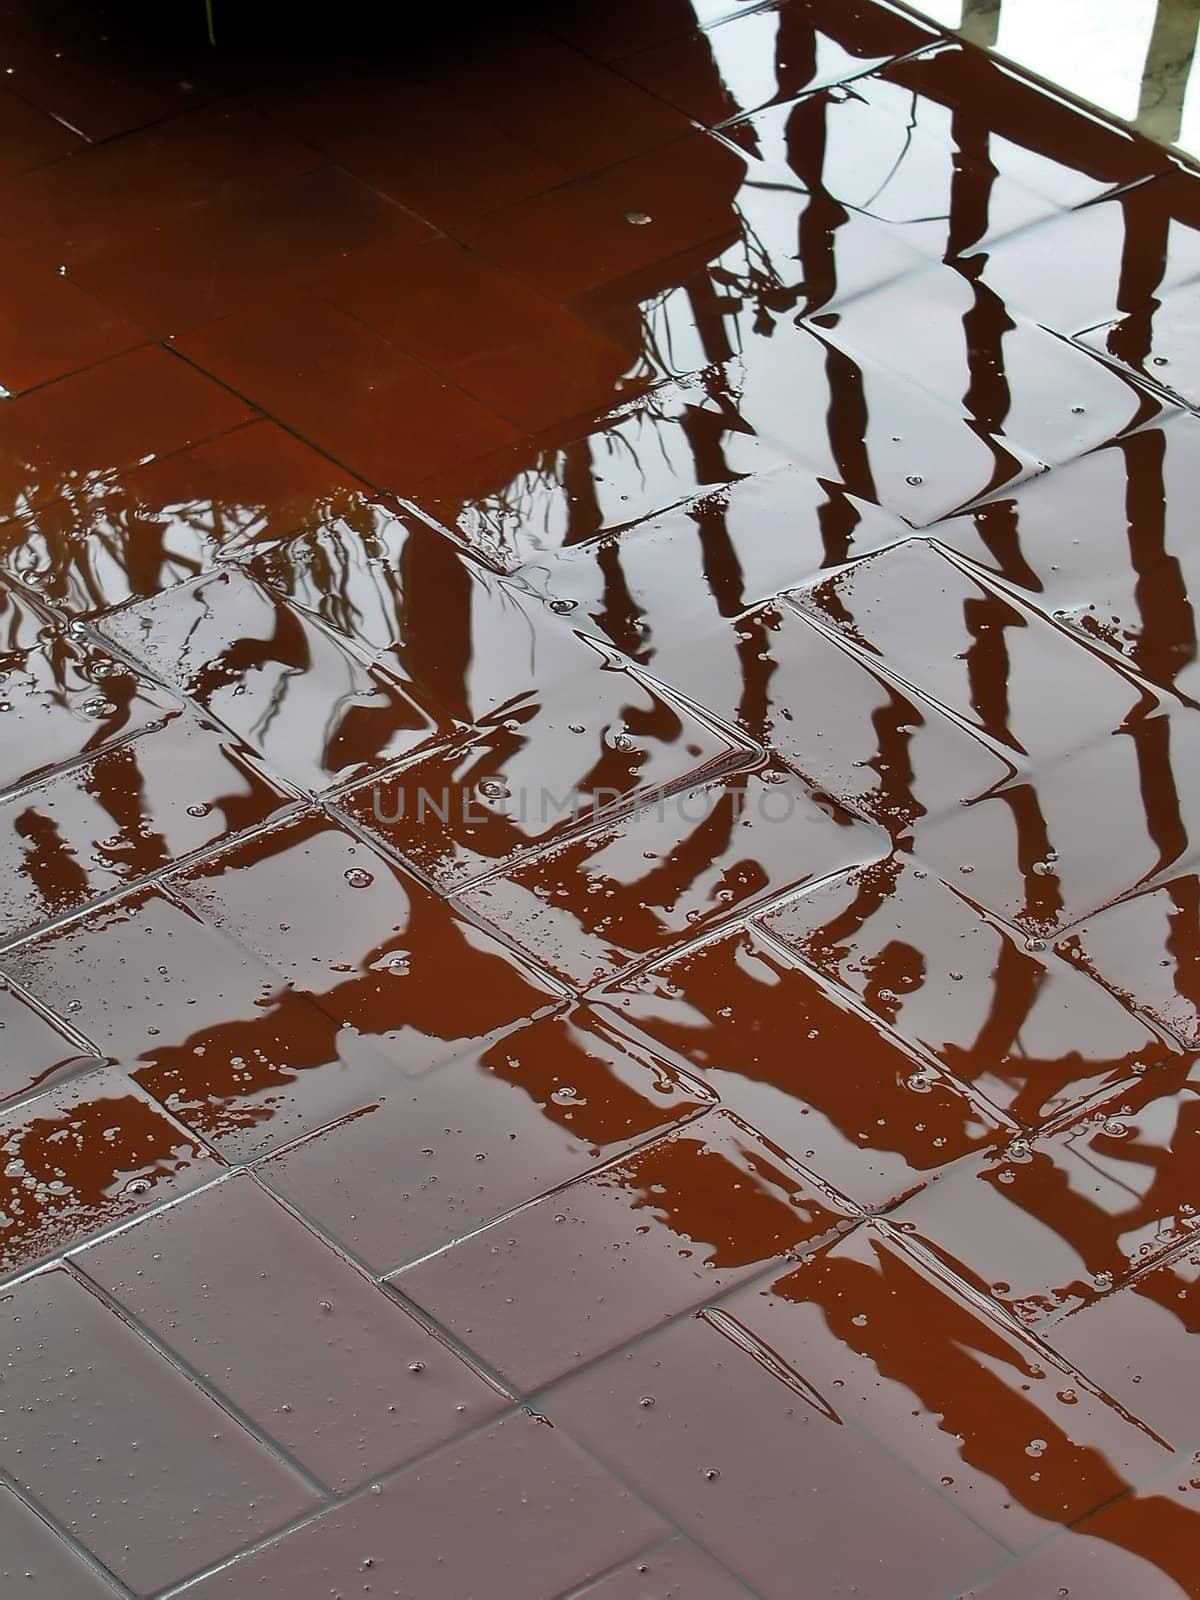 Reflection on pavement in the rain by sil